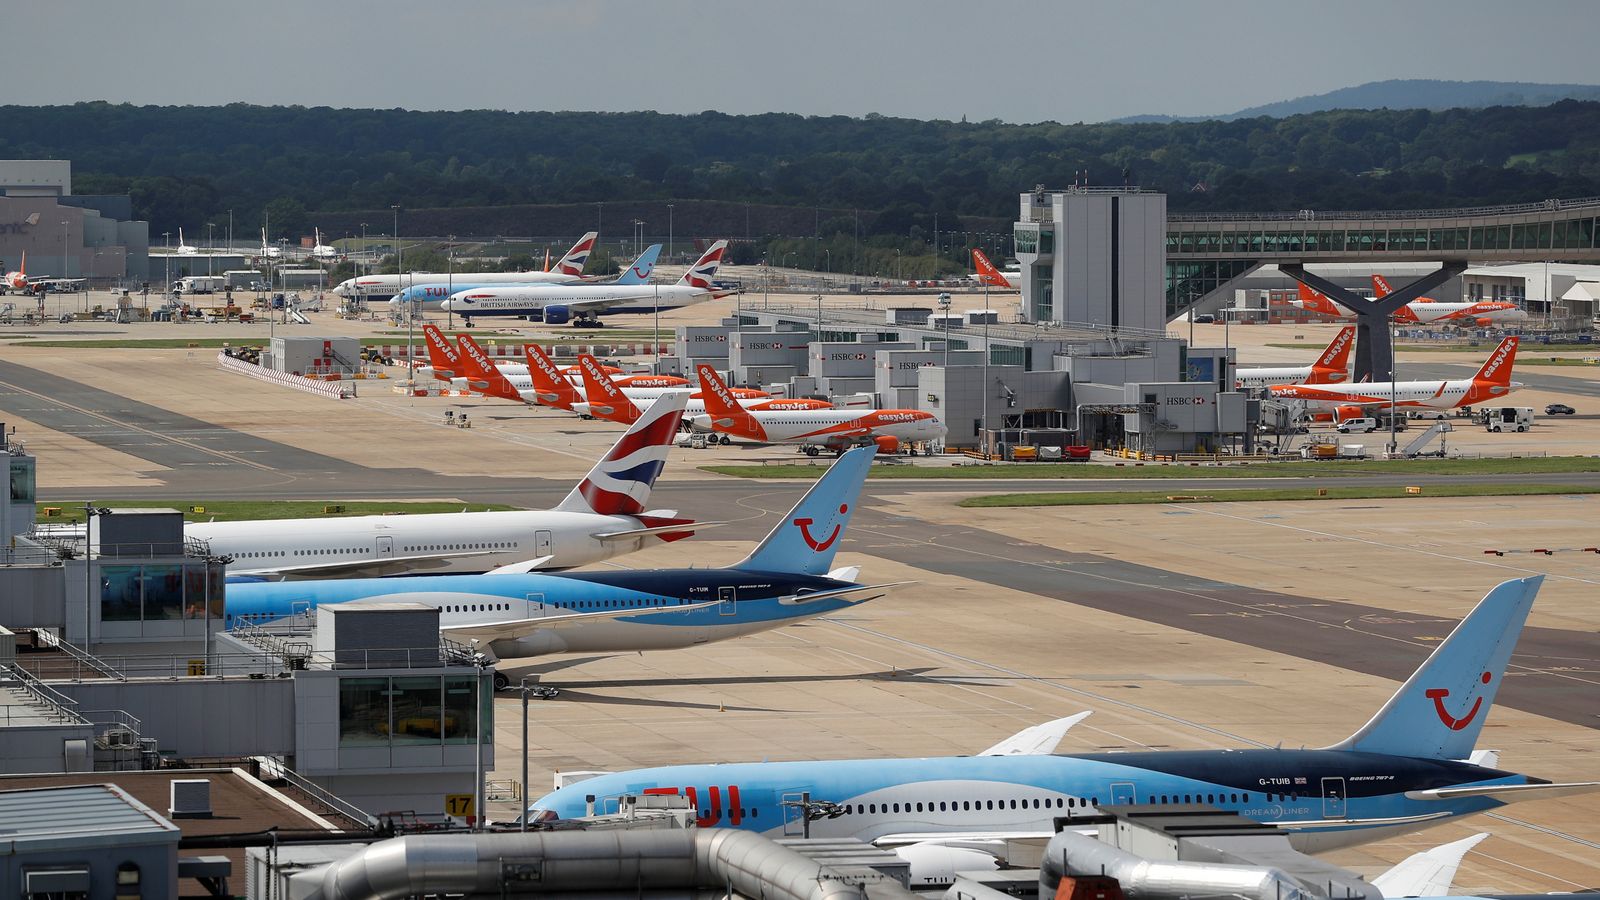 London Gatwick Airport to be hit by strike action at start of summer holidays - after easyJet announces cancellations